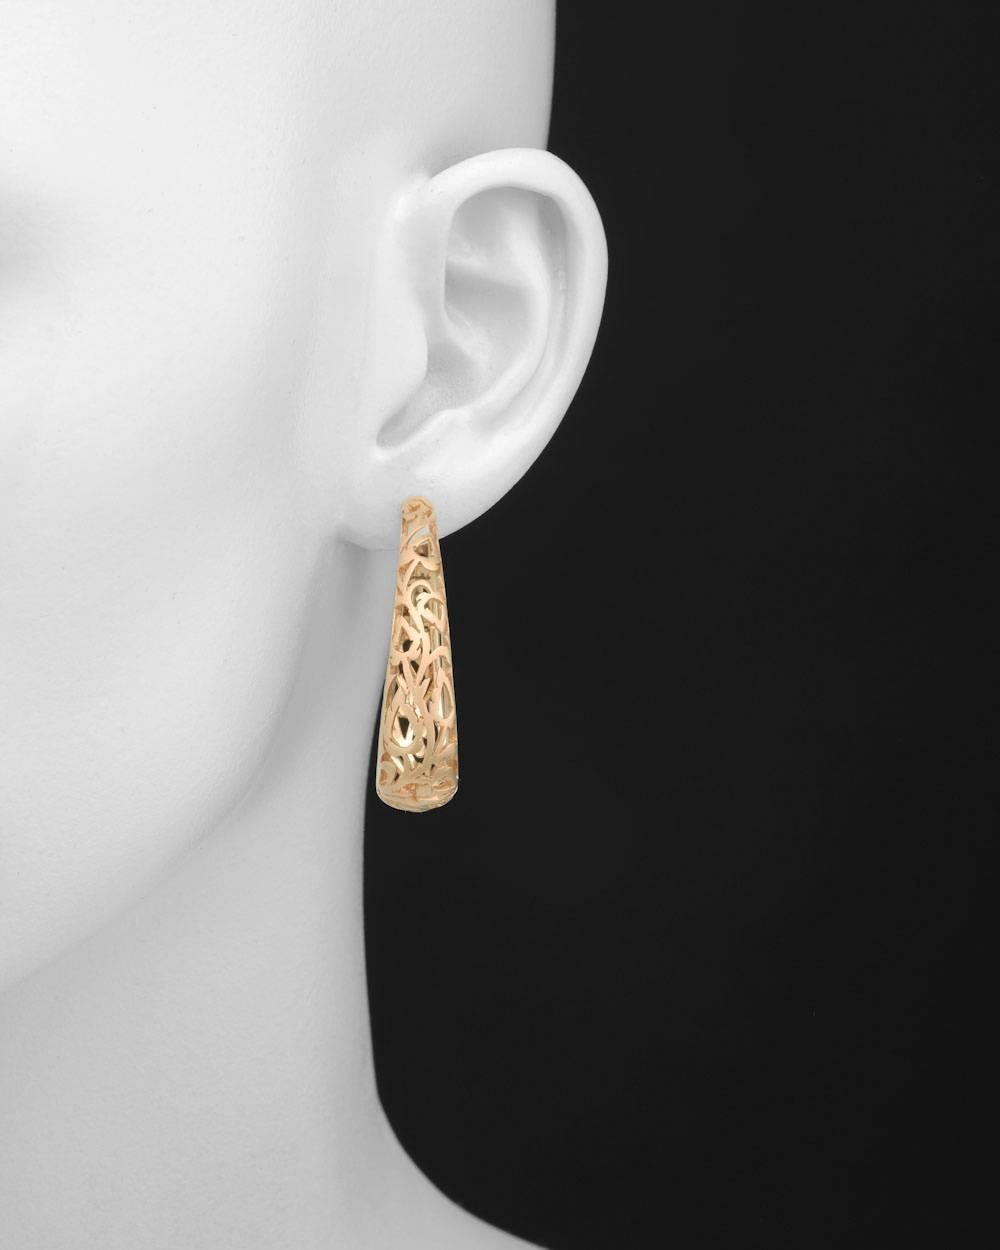 Openwork scrolling leaf motif hoop earrings, in matte-finished 18k pink gold, hinged with posts for pierced ears, signed Pomellato. 1.55